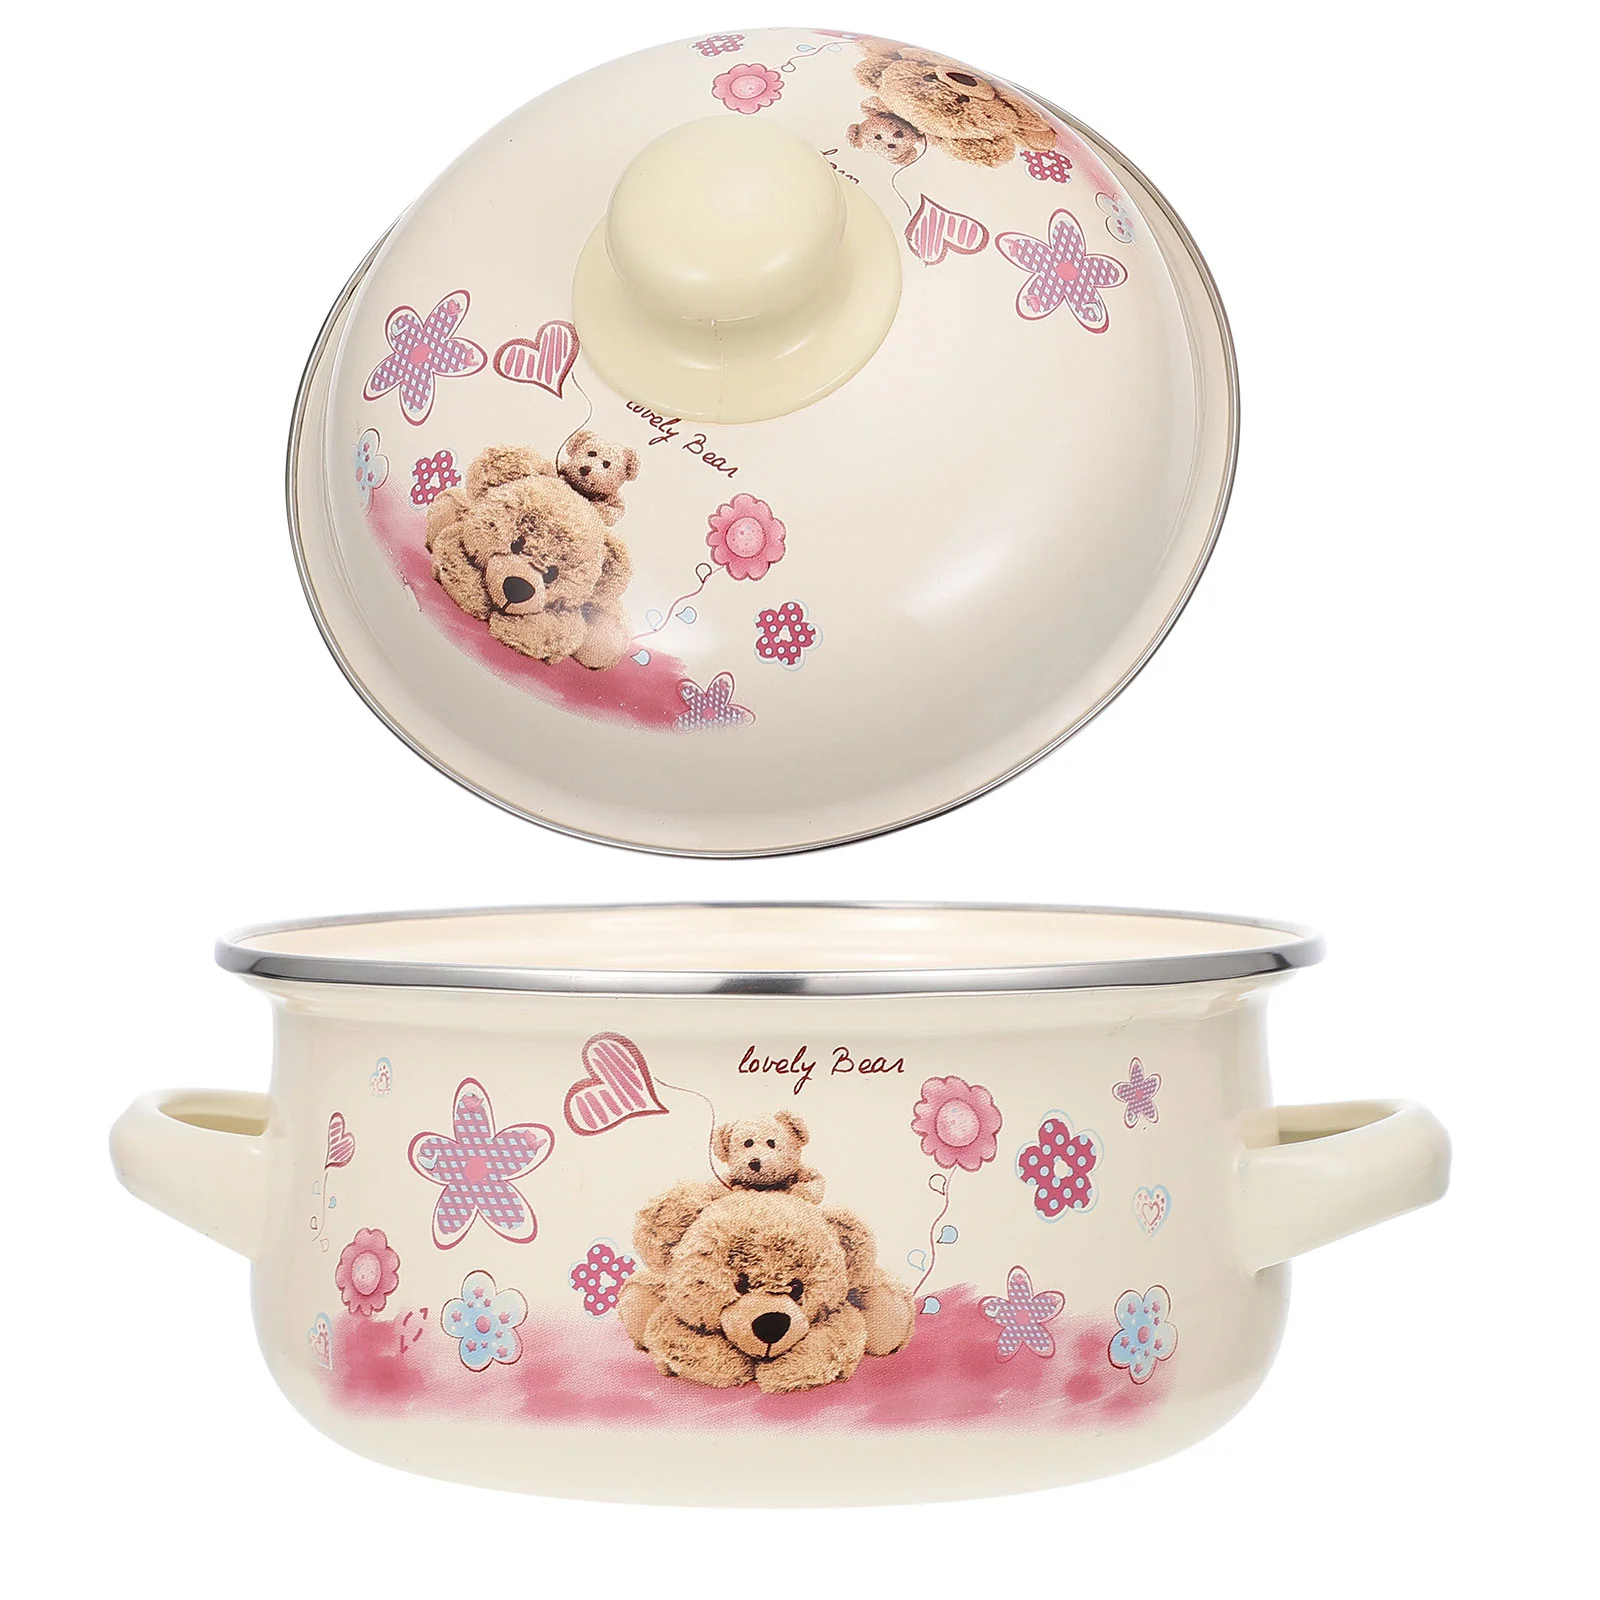 

Pot Bowl Soup Ceramic Casserole Pan Cooking Enamel Chinese Stew Sauce Clay Hot Steam Cookware Steamed Egg Dolsot Plate Heating